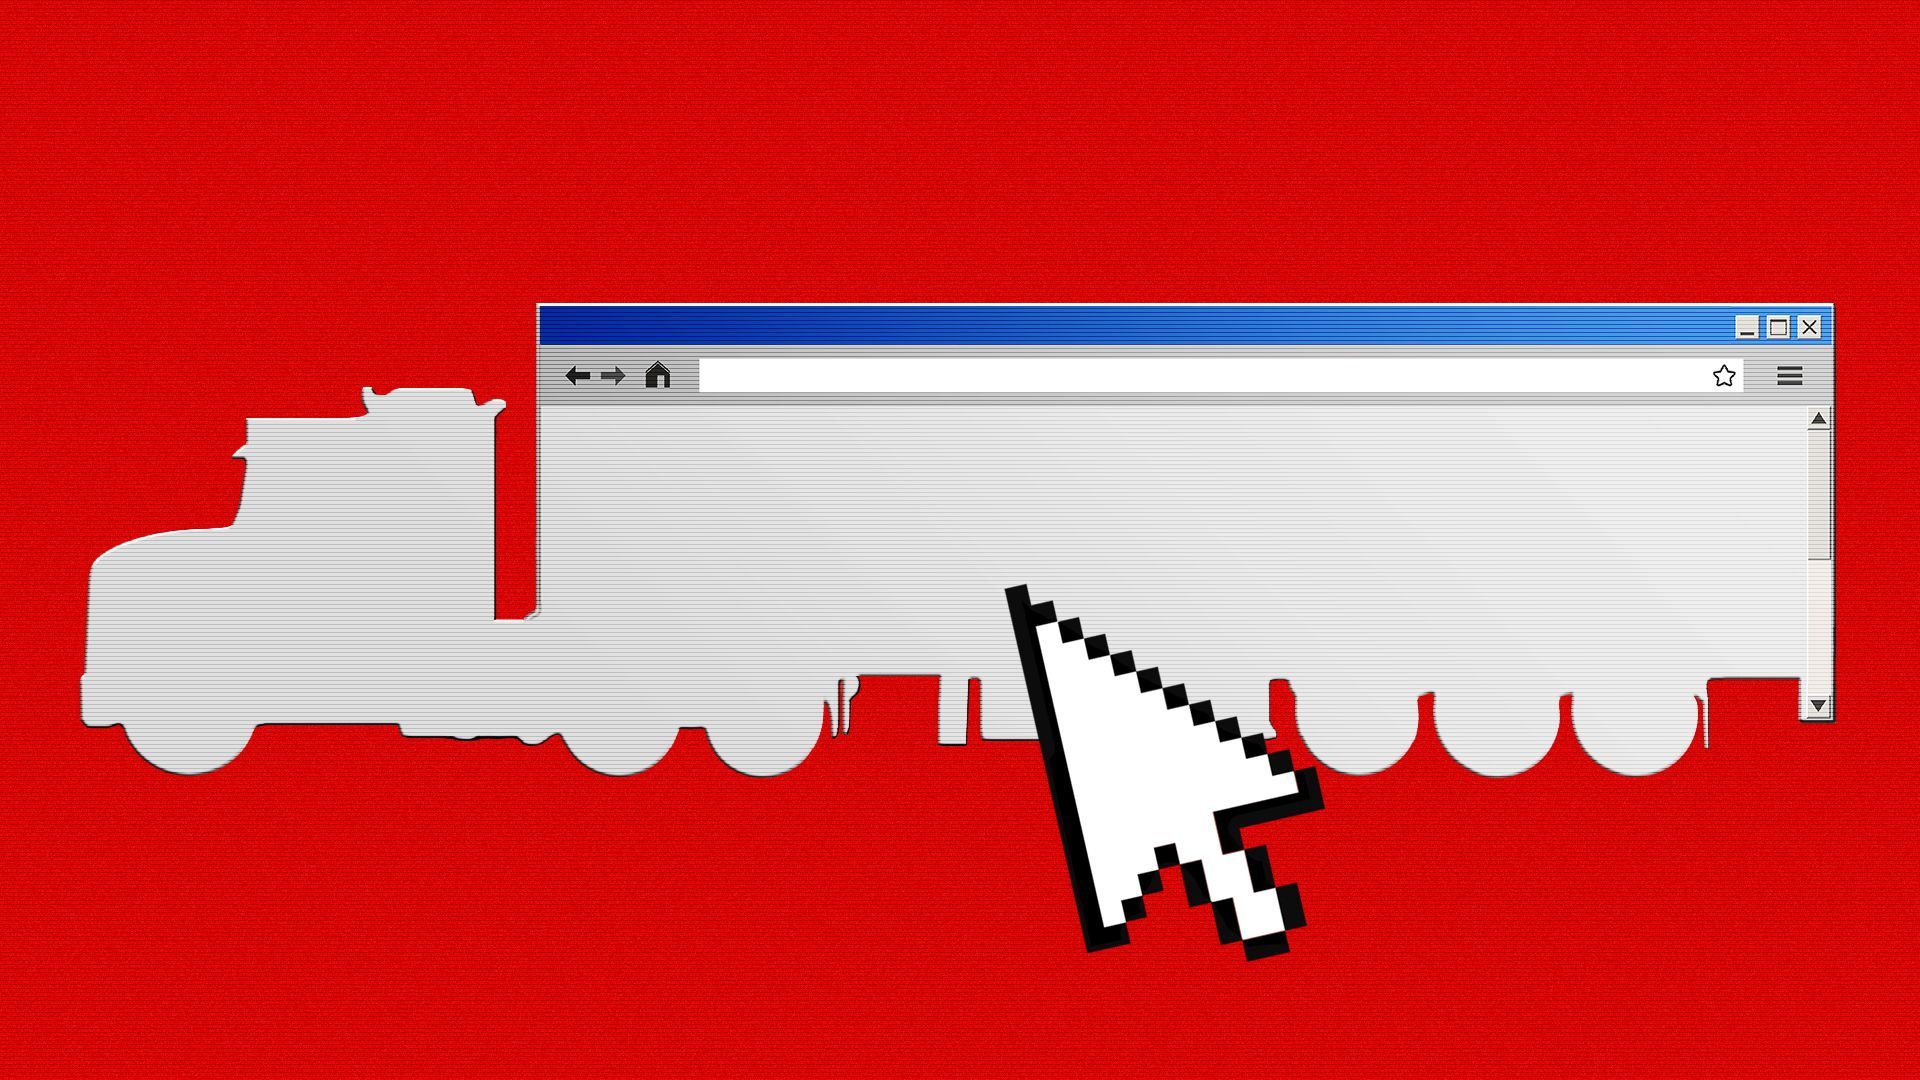 Illustration of an internet browser window shaped like a large truck being clicked on by a cursor arrow